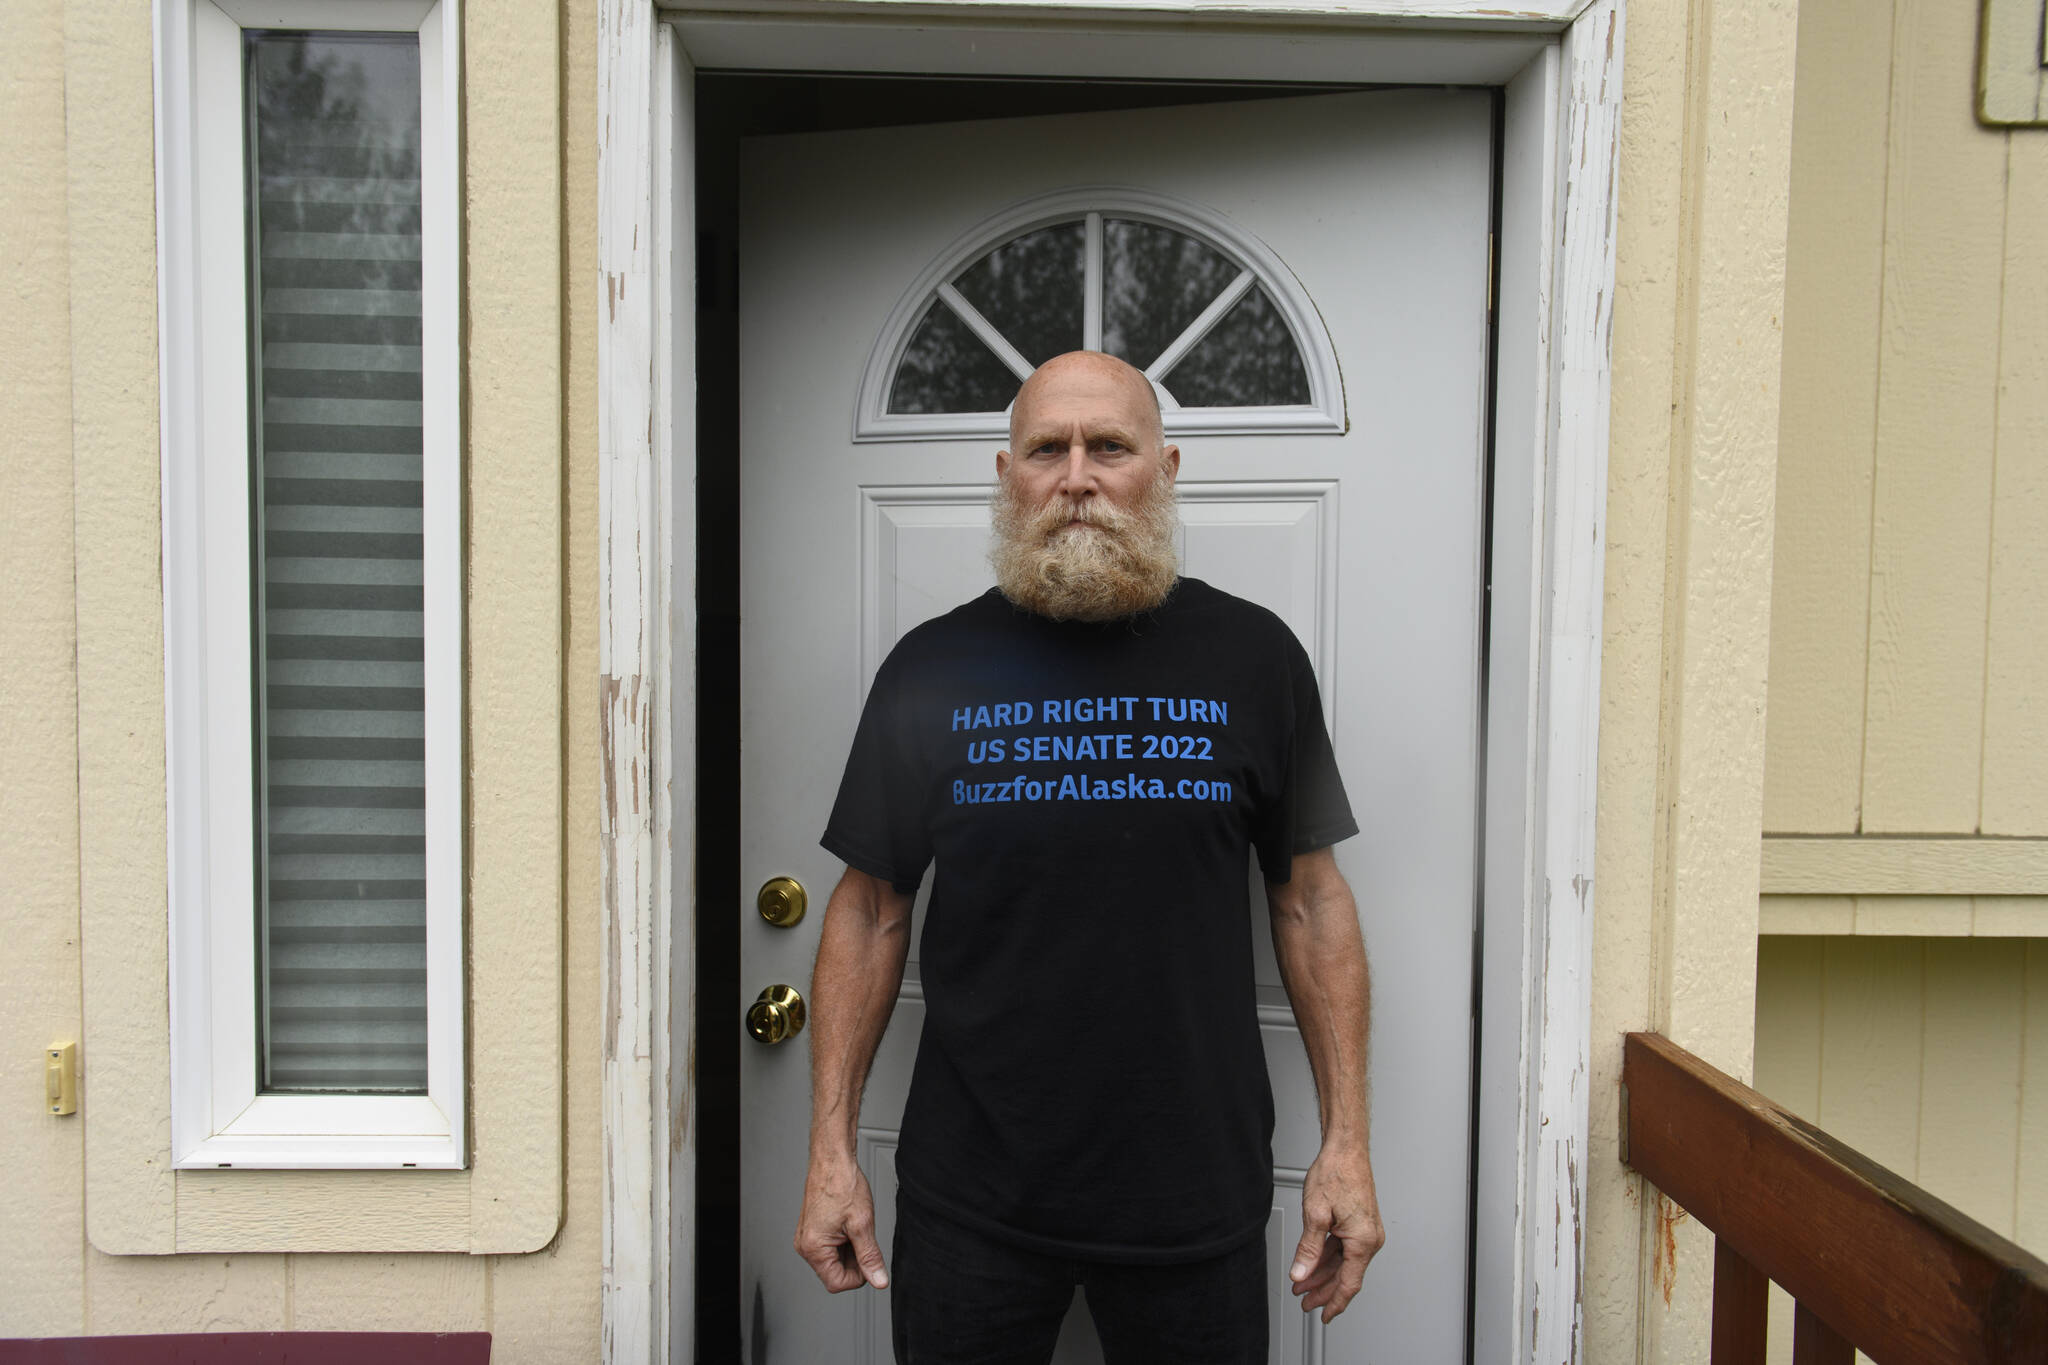 Buzz Kelley, of Wasilla, is pictured at his home on Aug. 19, 2022, in Wasilla, Alaska. Kelley is a candidate for U.S. Senate. (Marc Lester/Anchorage Daily News via AP)